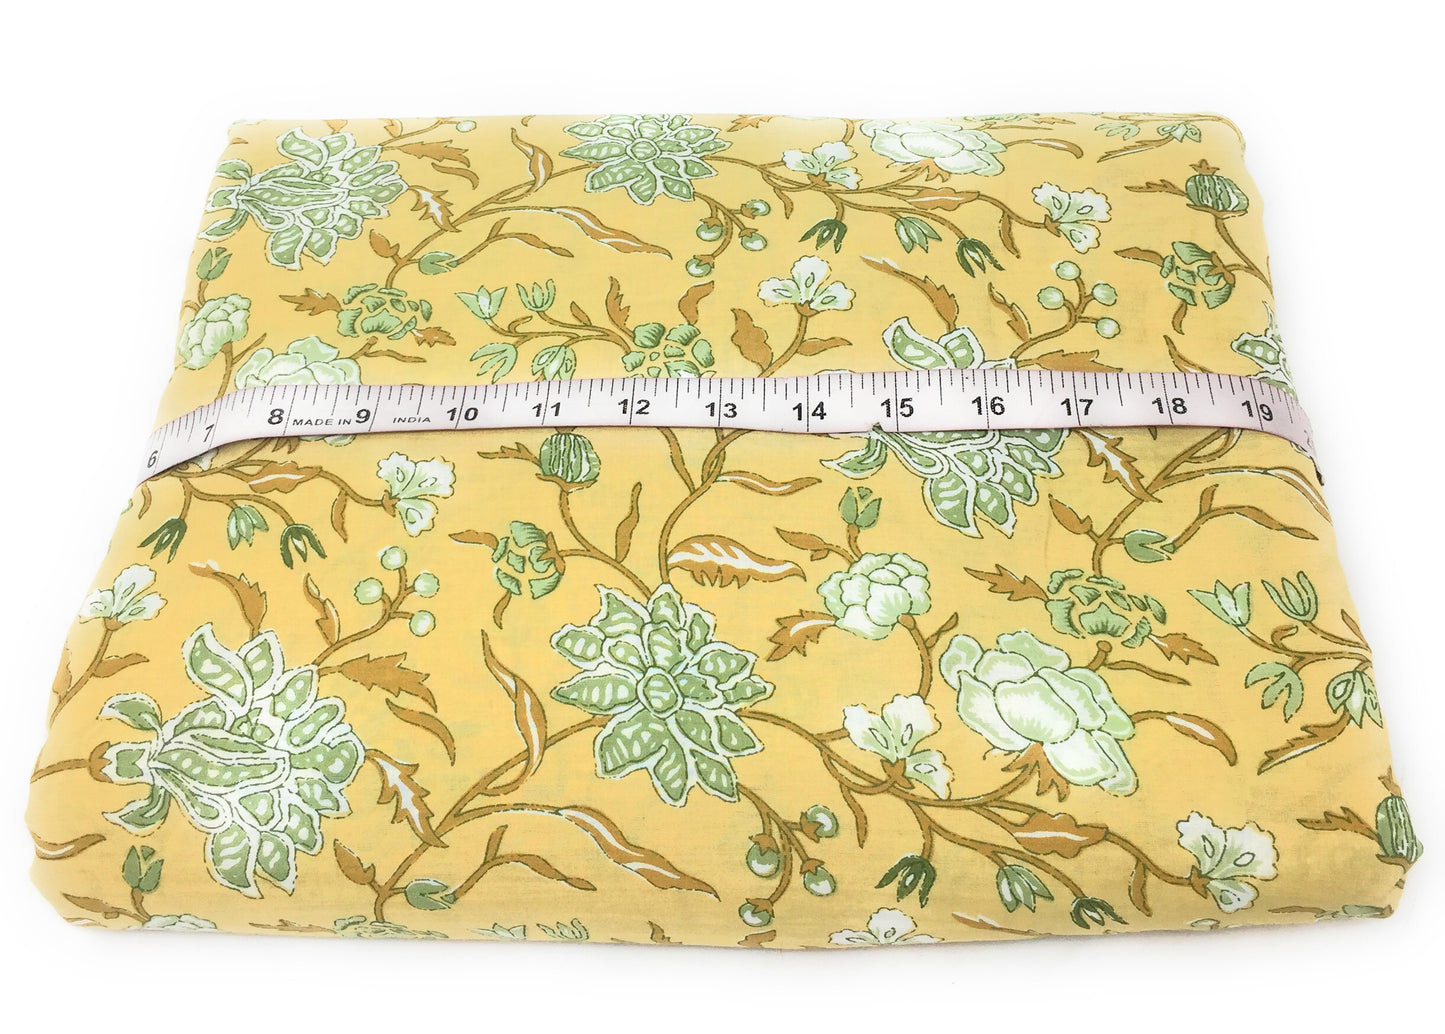 Cotton Running Fabric Floral print